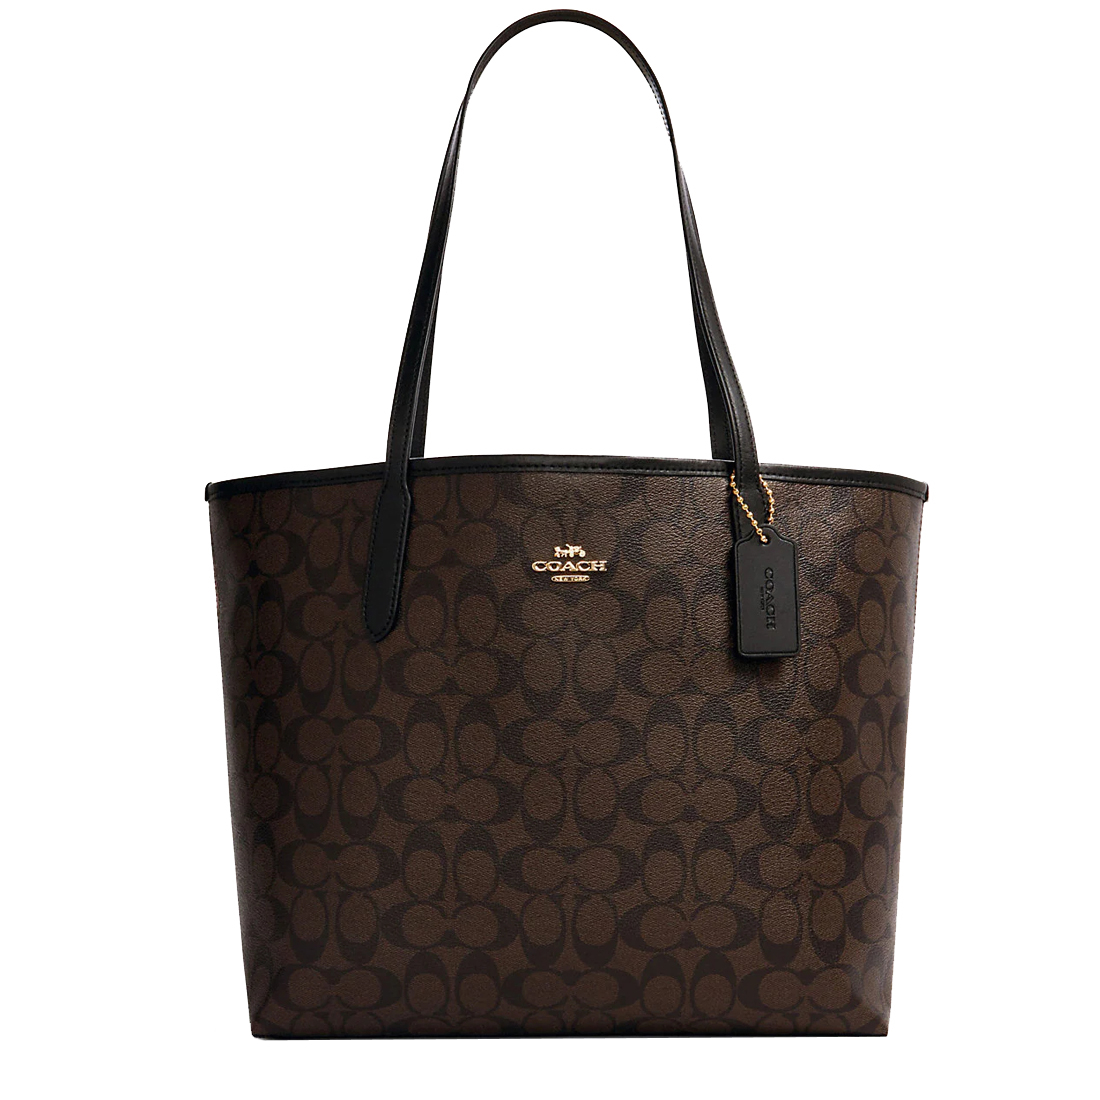 Coach City Tote Bag In Signature Canvas in Gold/ Brown Black 5696 ...